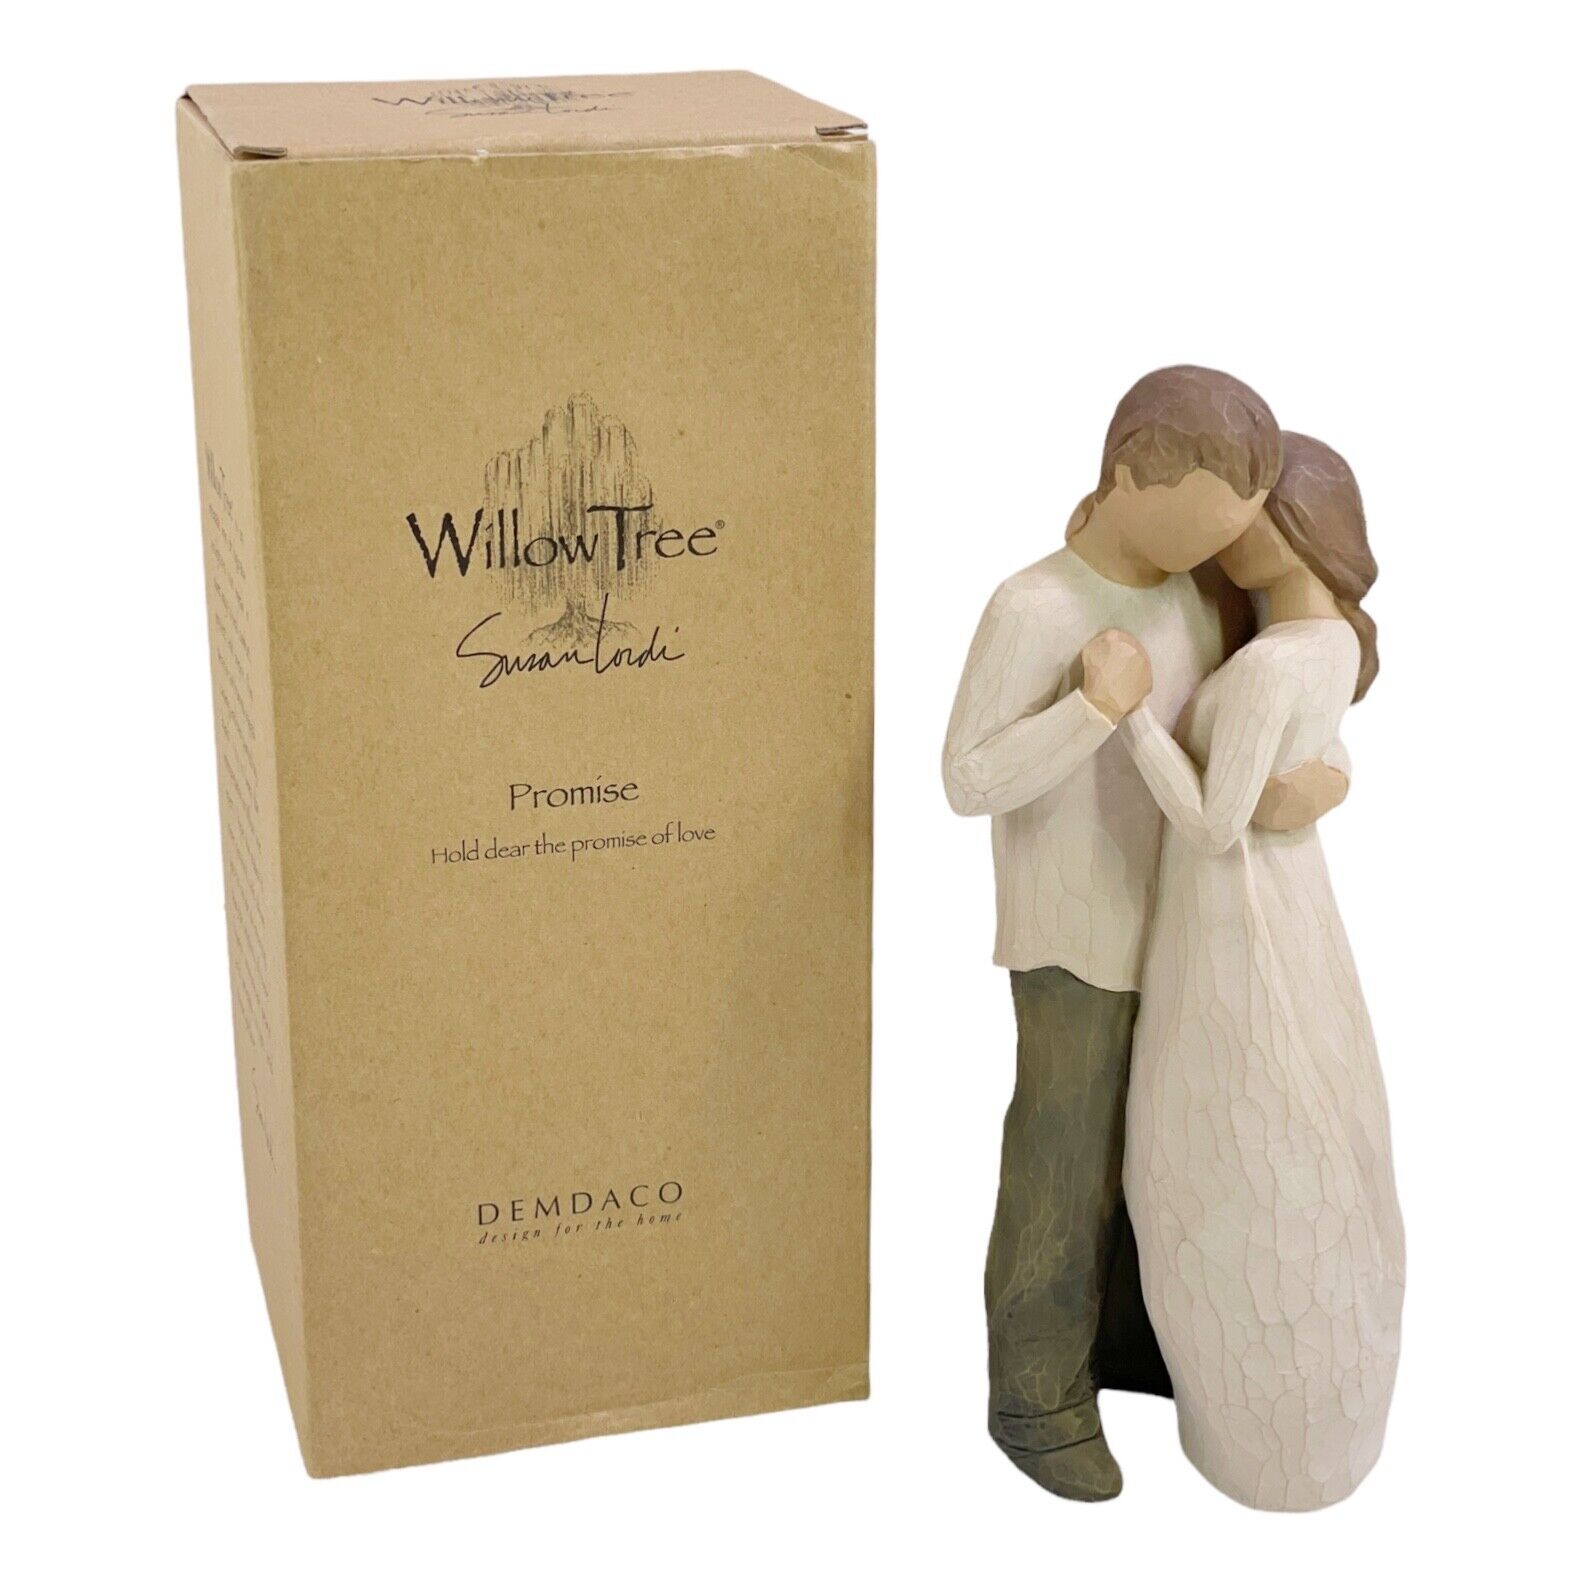 Willow Tree PROMISE Figurine 2003 Demdaco By Susan Lordi New In Box *READ